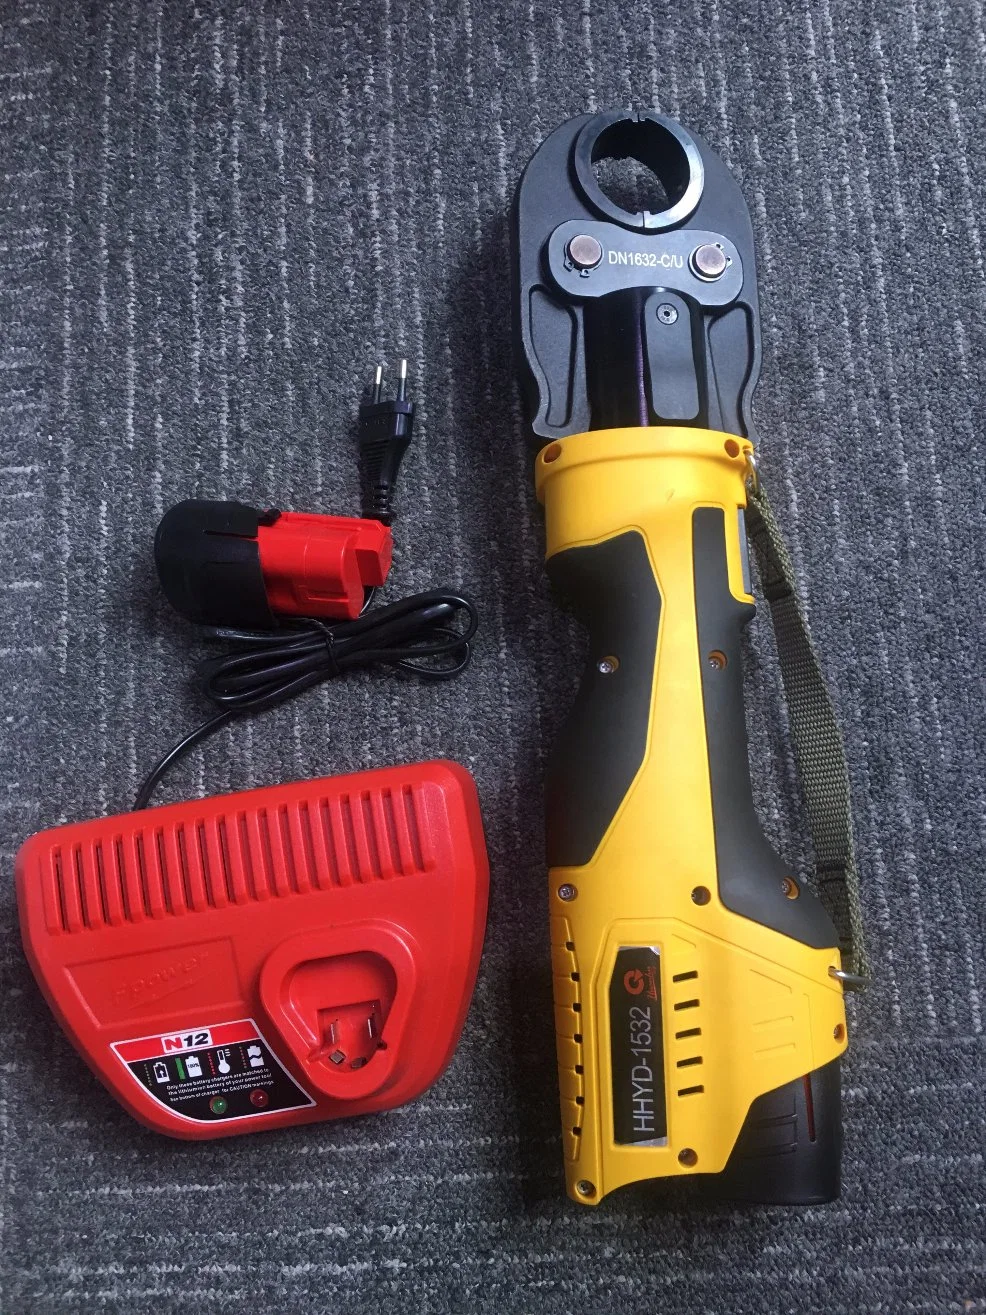 Hhyd-1532 Electrical Hydraulic Pex Crimping Tool Plumbing Crimping Tool for Stainless Steel Tube, High Quality&#160;